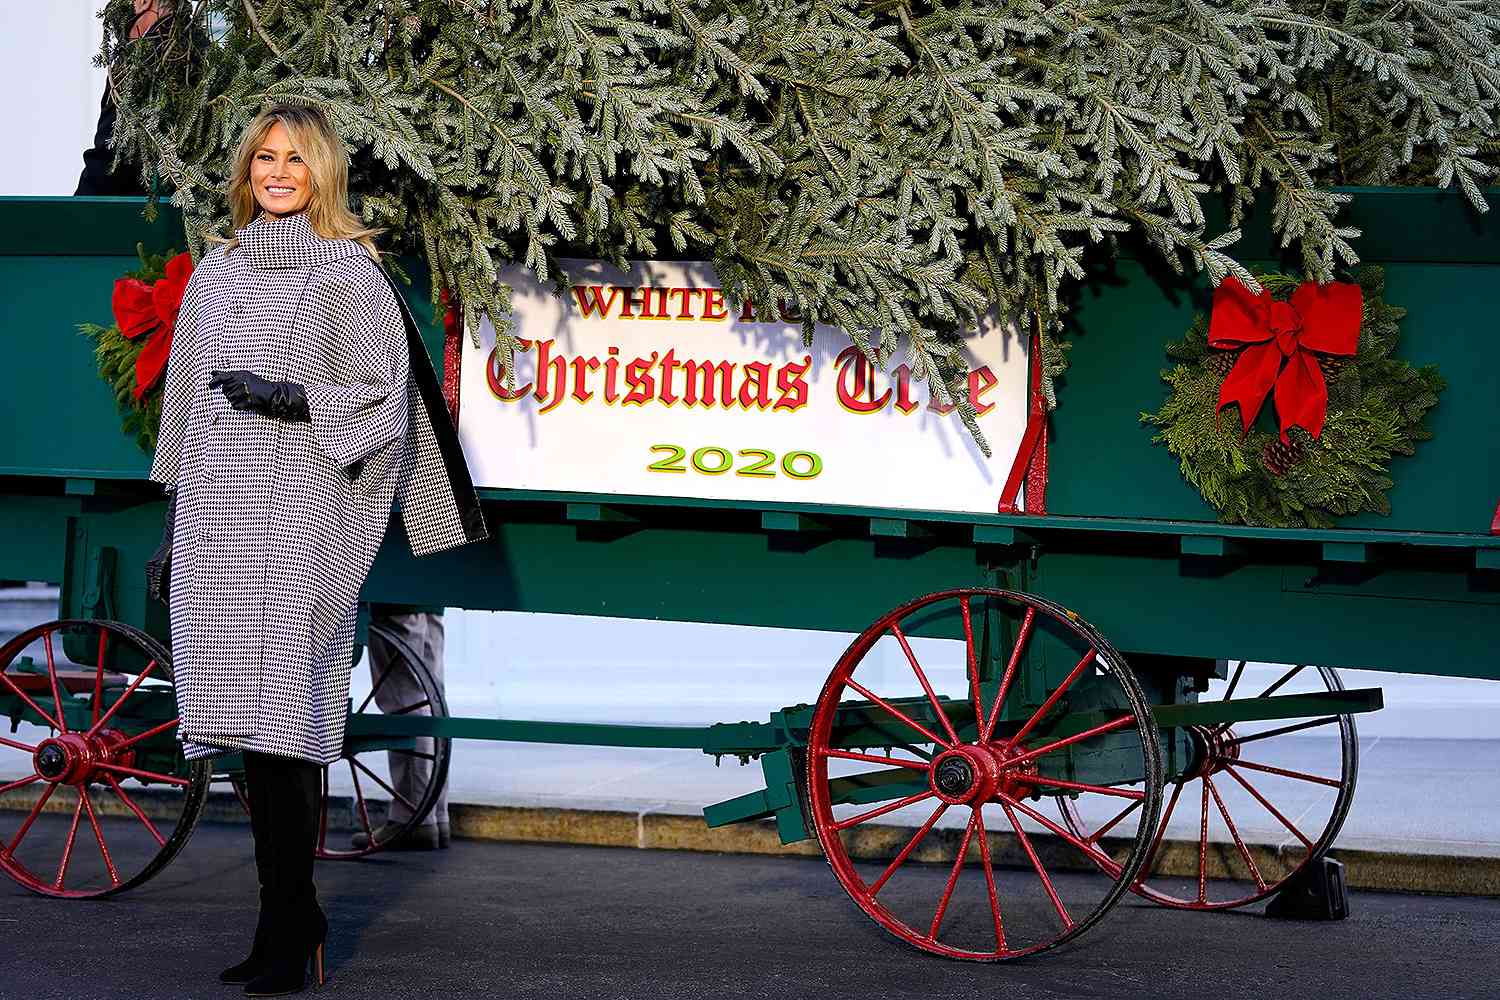 Melania Trump Greets White House Christmas Tree for the Last Time After Husband's Election Loss